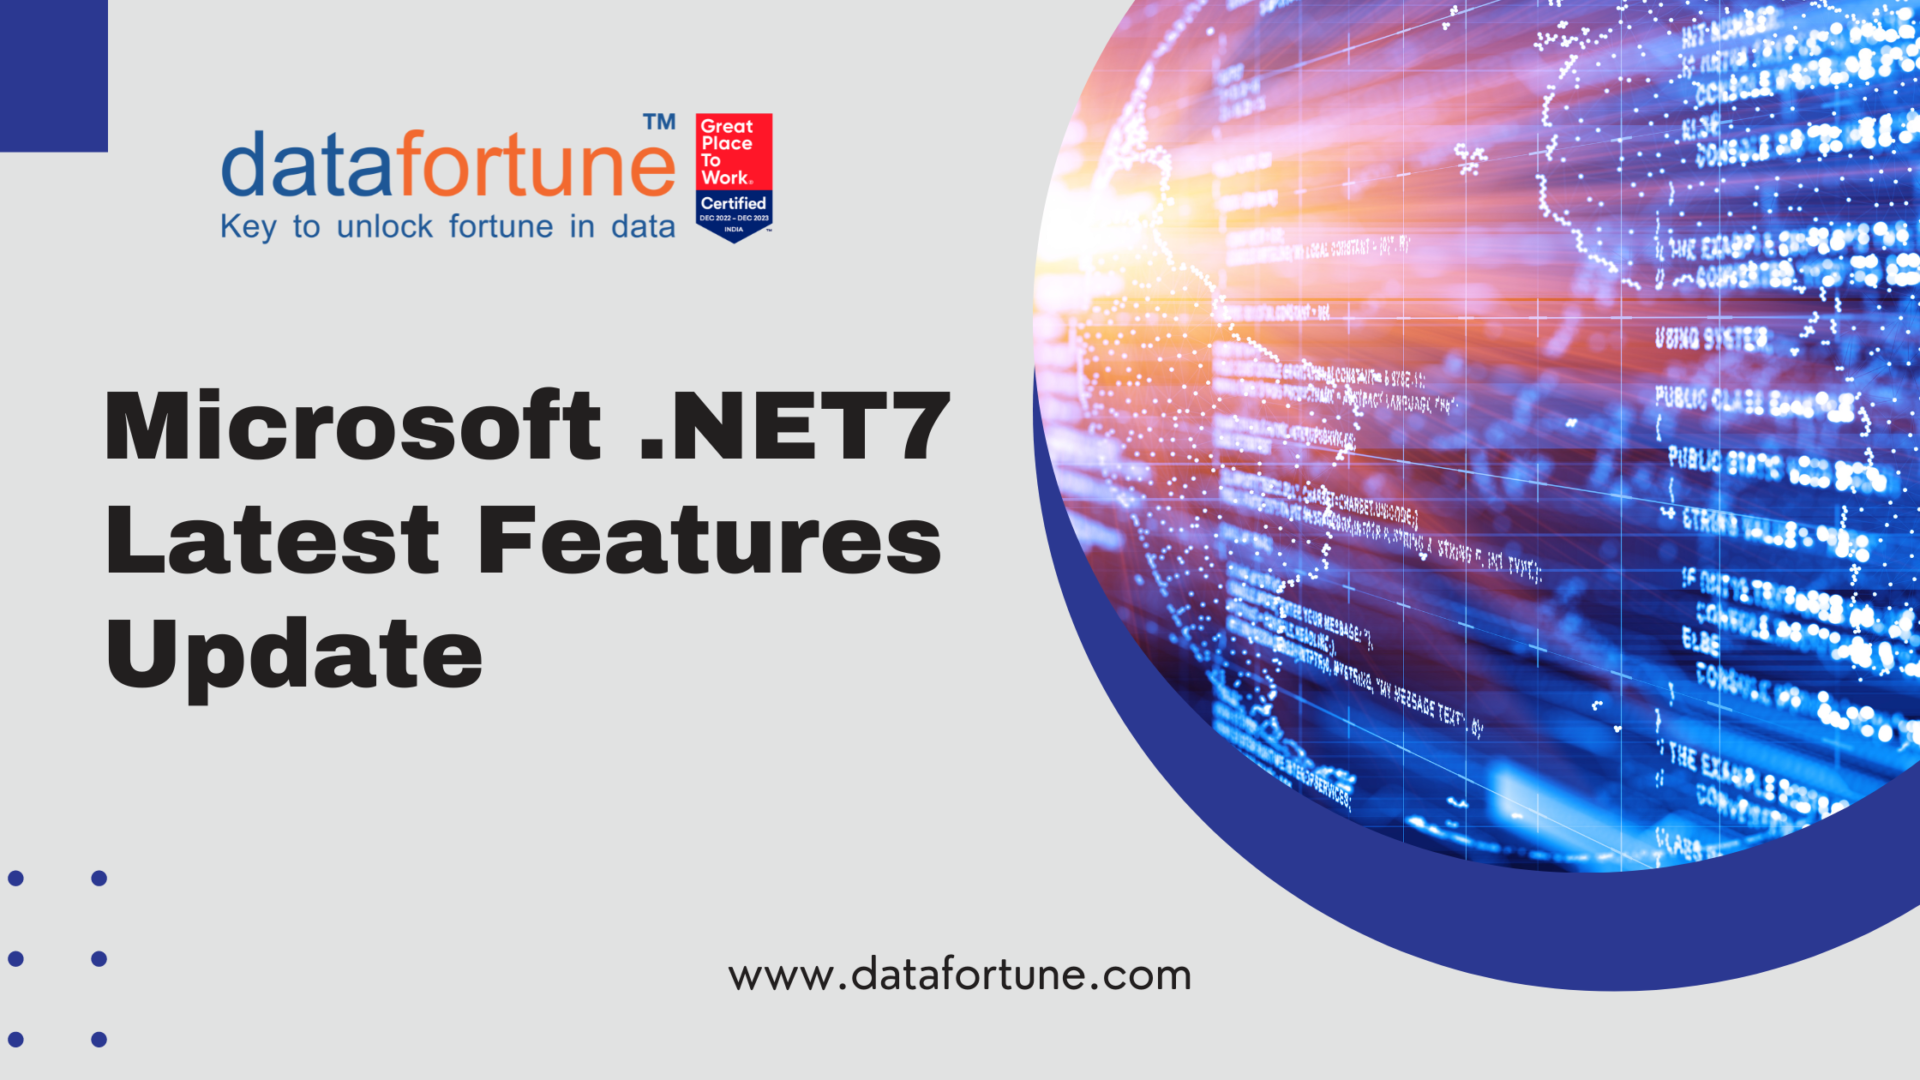 Microsoft.NET7 Latest Features Update